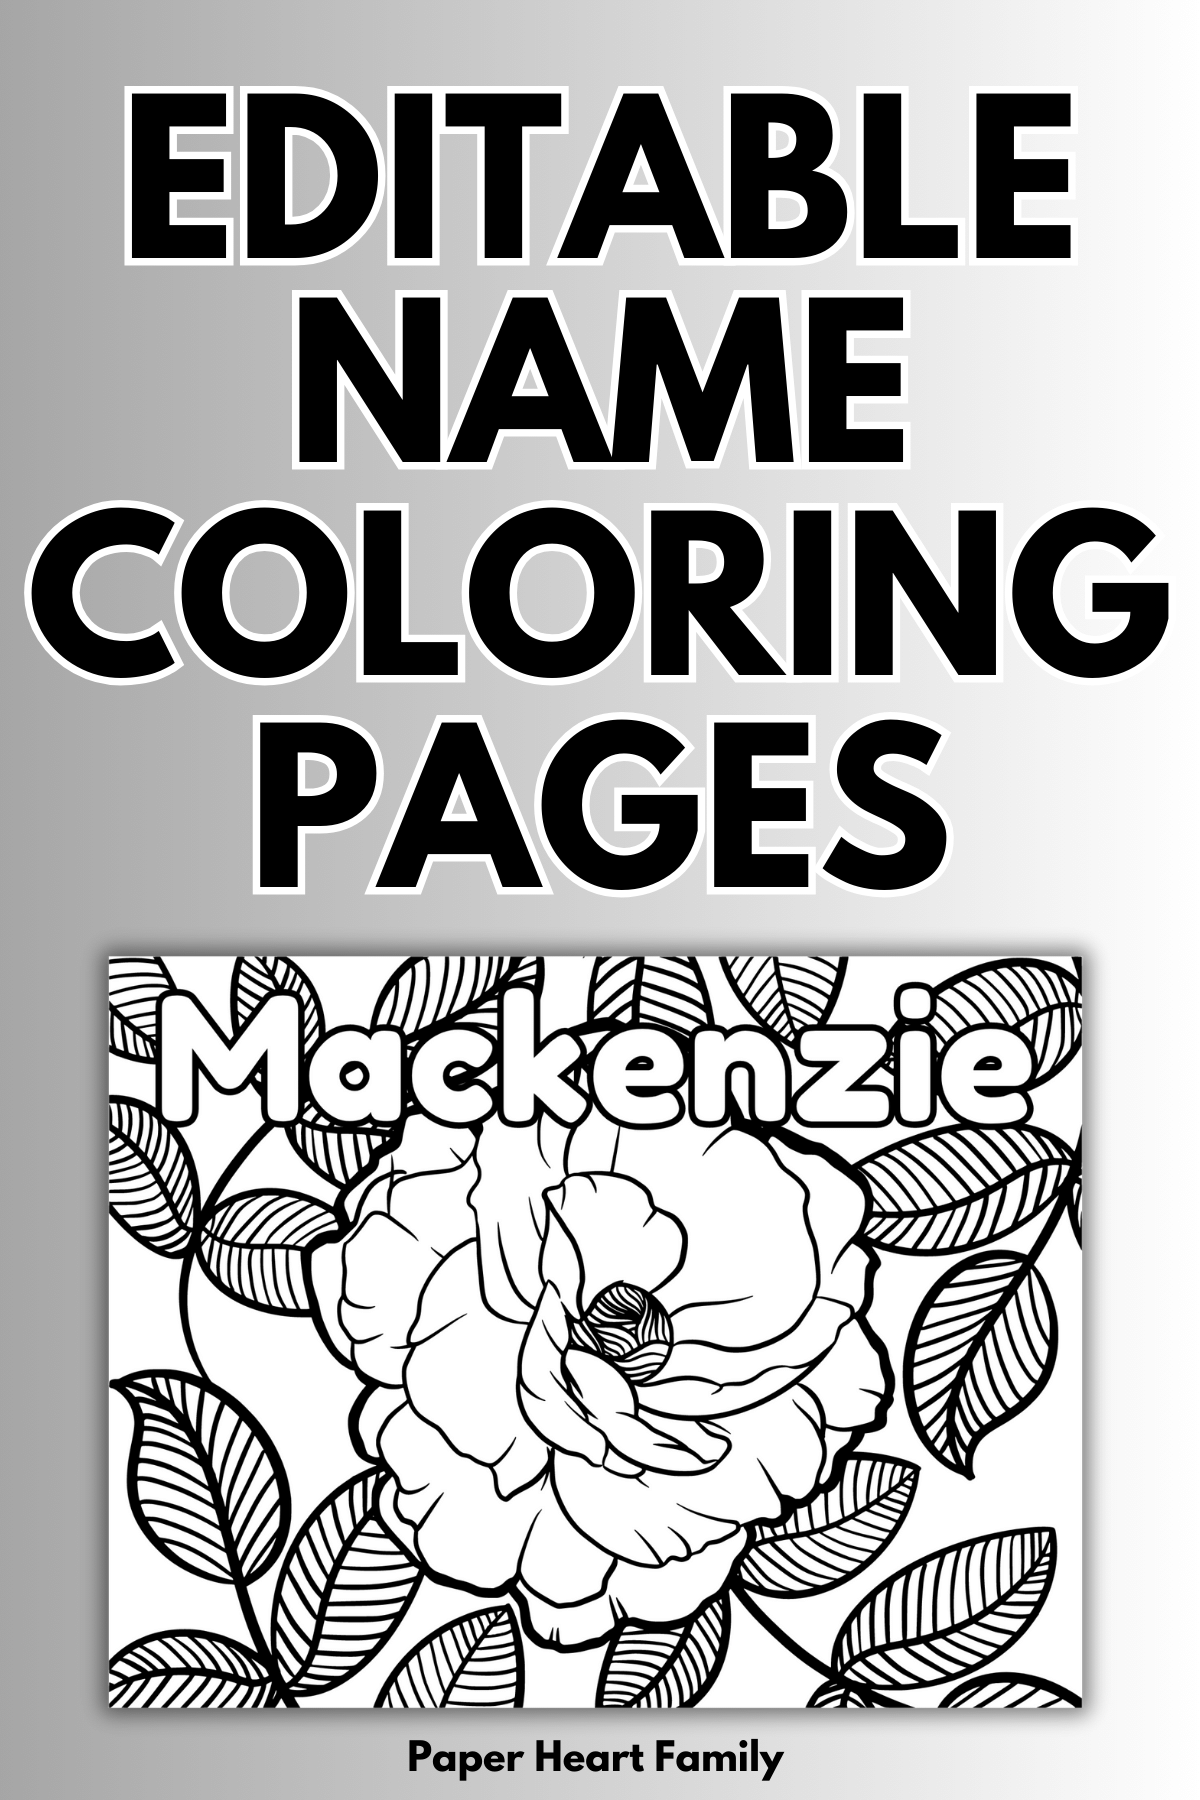 Coloring page with large flower and leaves and name Mackenzie